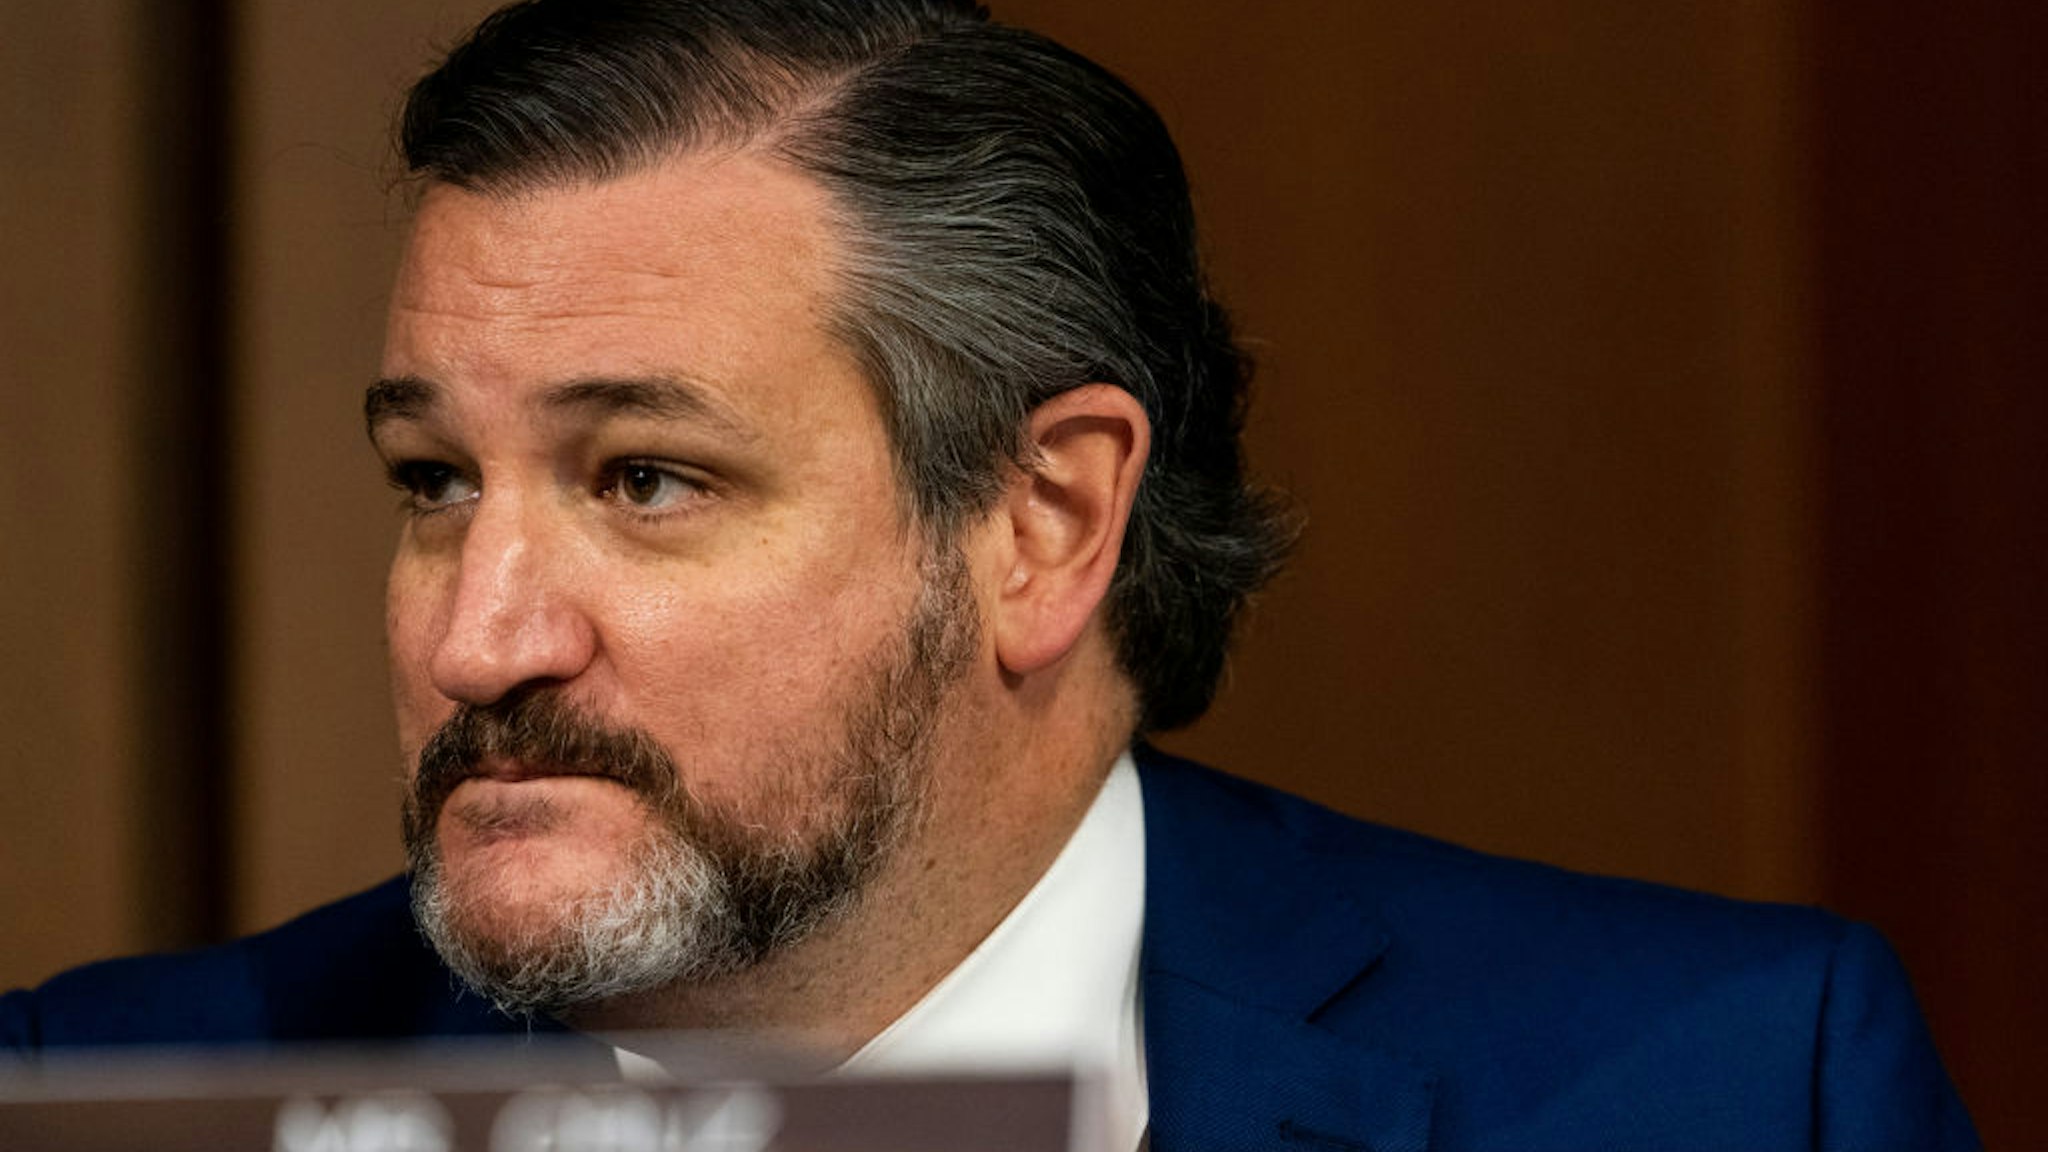 Sen. Ted Cruz (R-TX) listens on the second day of the Supreme Court confirmation hearing for Judge Amy Coney Barrett before the Senate Judiciary Committee on Capitol Hill on October 13, 2020 in Washington, DC.